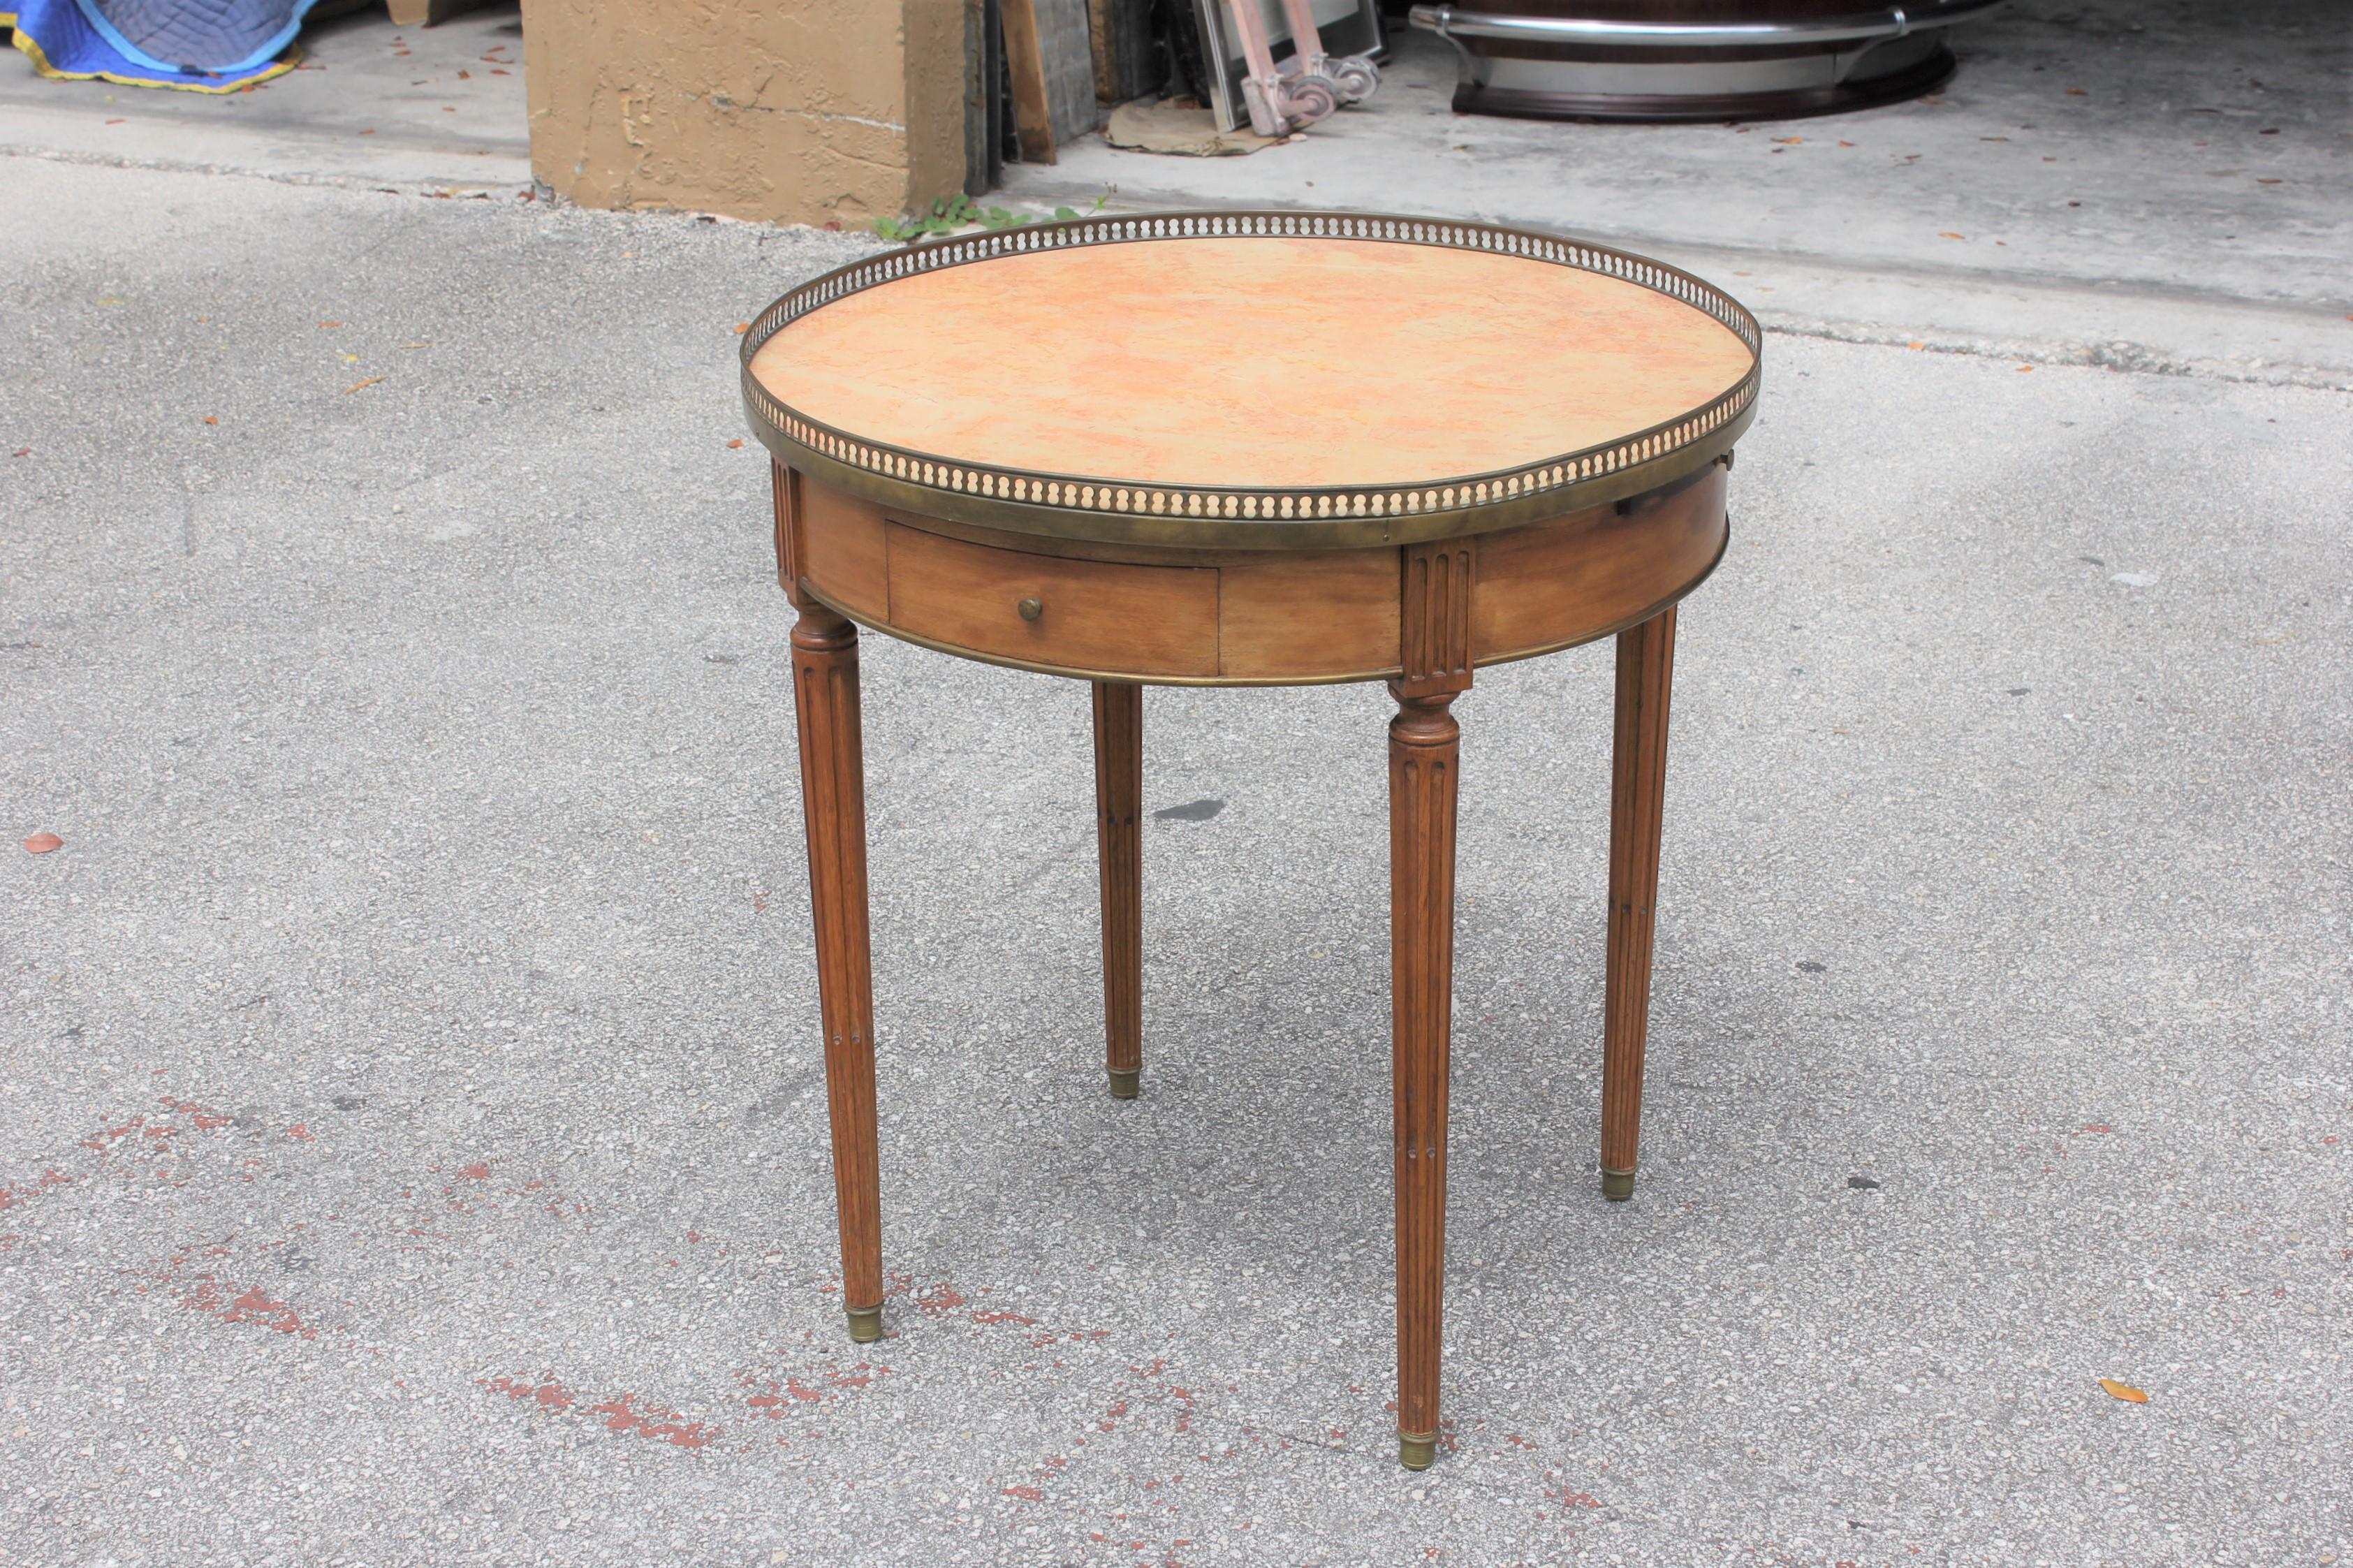 Beautiful French XVI bouillotte table solid mahogany, circa 1900s, this side table has two drawers and two pull-out tablet shaped leaves. Each leaf adds an additional 7” to the length, and are covered with a brown leather surface. The marble top is